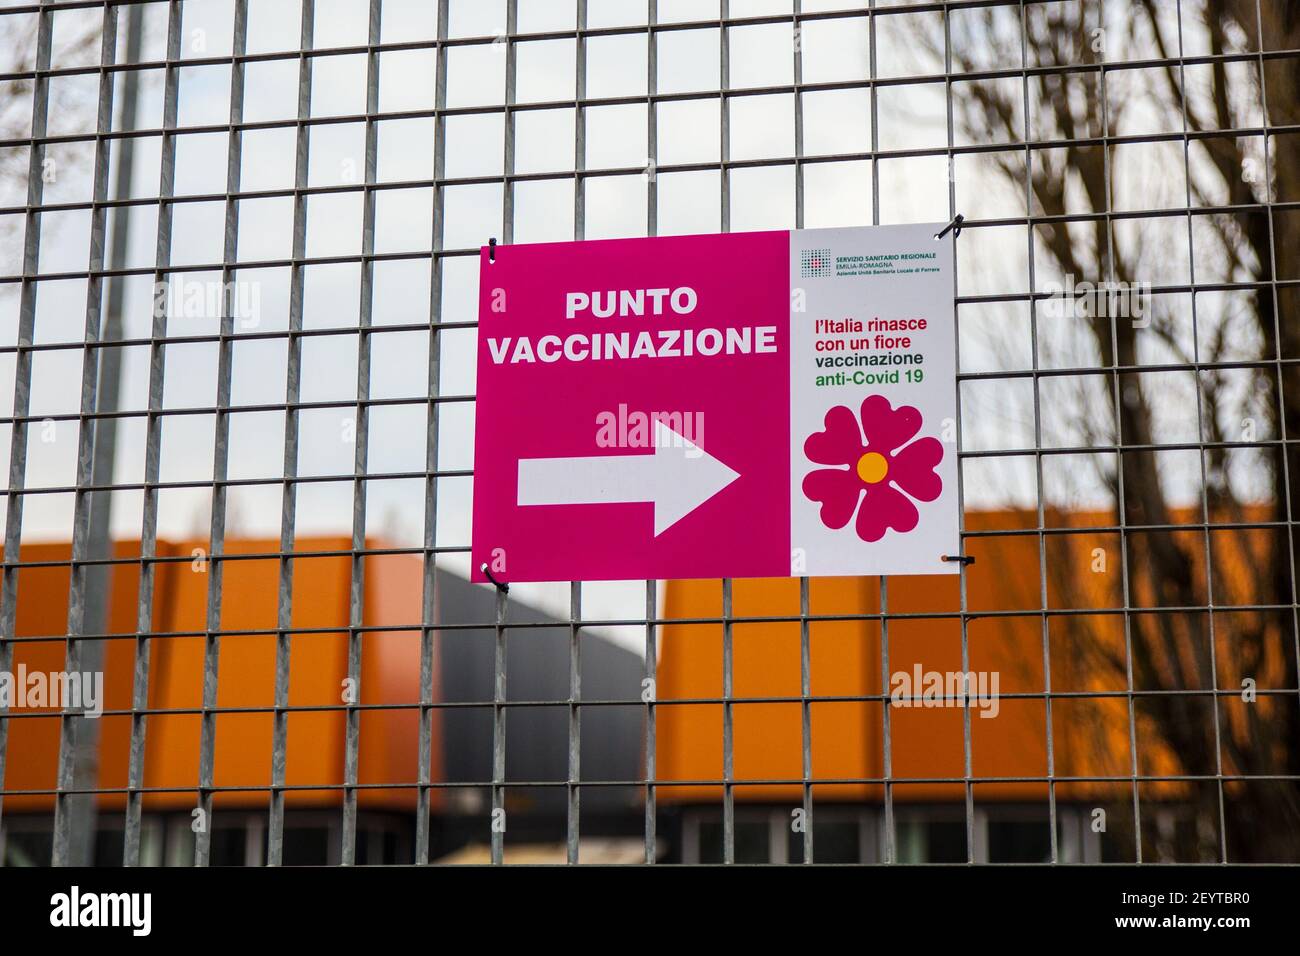 (3/5/2021) Ferrara Fiere Congressi and Azienda USL are proud to activate the Fiera di Ferrara Vaccination Center - the most important in the province with its sixteen boxes made to measure for vaccines and 272 chairs for waiting - included in the provincial AntiSars-Cov2 Vaccination Plan with also the other extraordinary centers of Codigoro, Argenta and Cento. The pavilion - about 2,750 square meters - is organized according to a path that will start from an access and triage area where registration takes place and provides support information to citizens and from a waiting area in the immedia Stock Photo